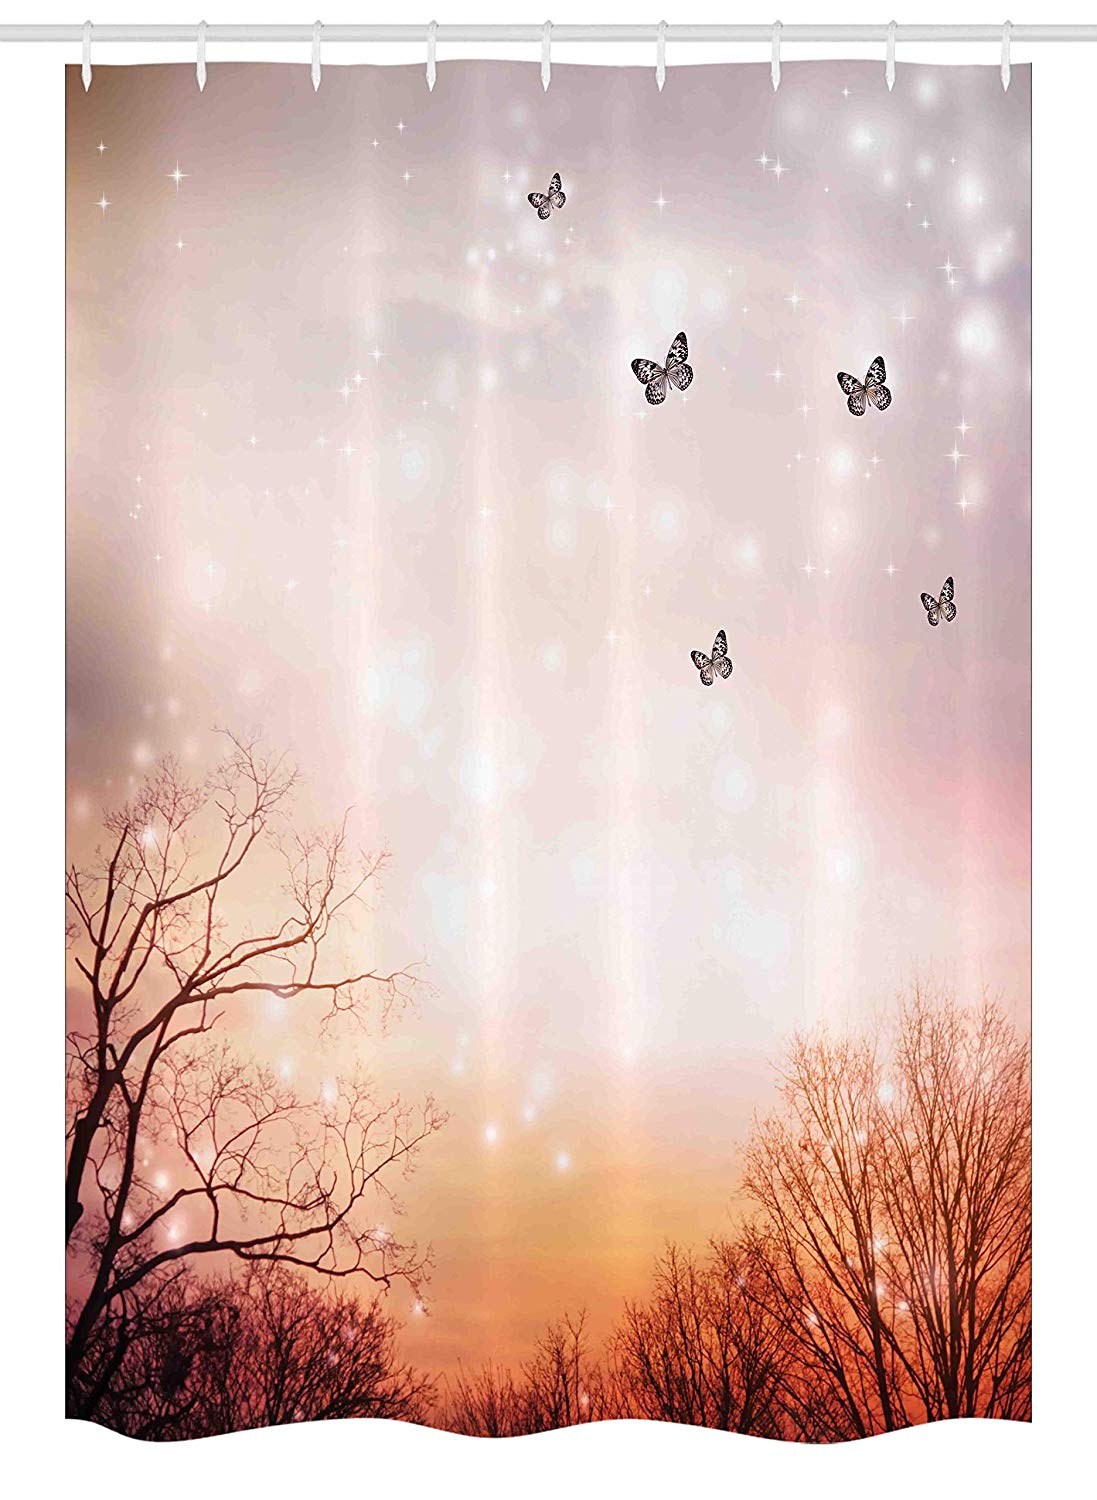 Ambesonne Butterfly Stall Shower Curtain, Dreamy Butterflies Over Trees Romantic Fantasy Blurry Sky Artistic Design, Fabric Bathroom Decor Set with Hooks, 54 W x 78 L Inches, Orange Baby Pink